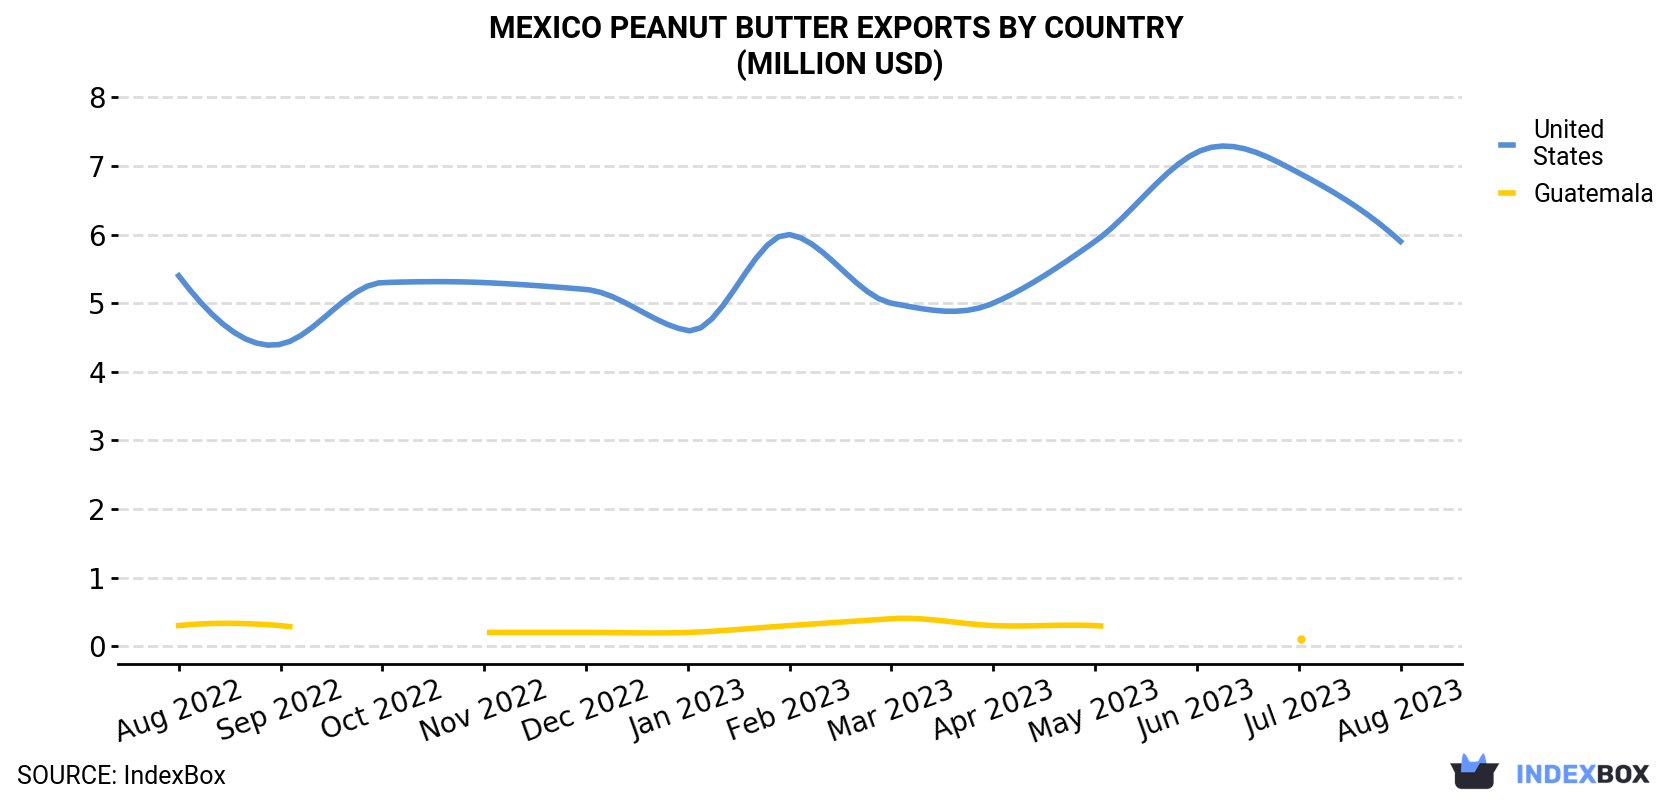 Mexico Peanut Butter Exports By Country (Million USD)